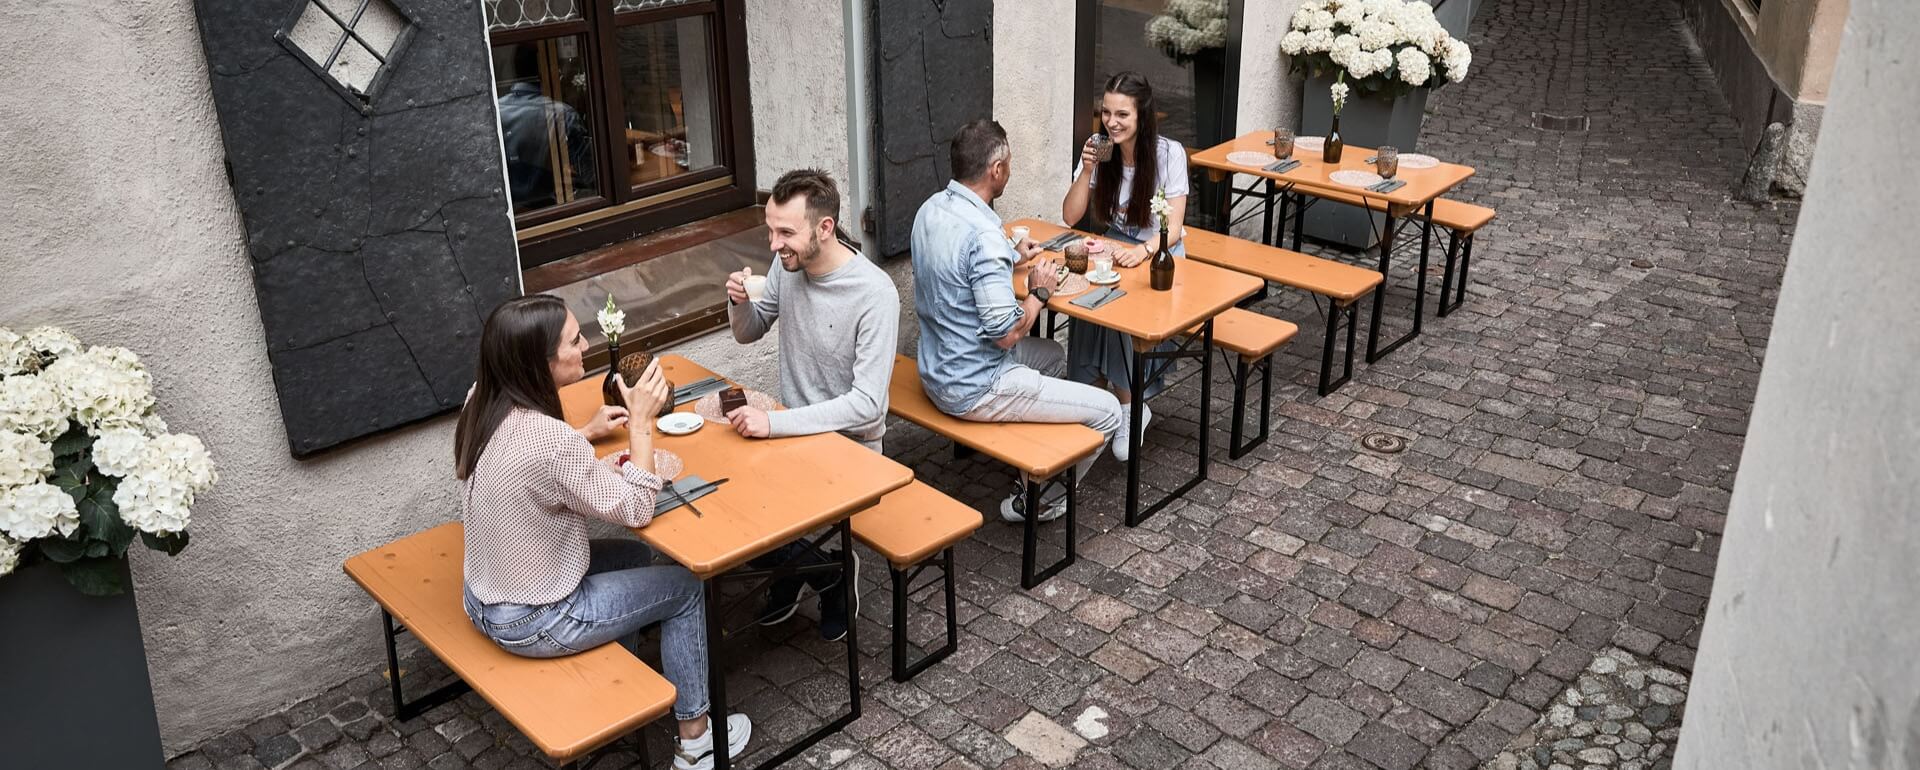 The small beer garden table sets Shorty are placed in the outdoor area of a restaurant in an alley and the customers enjoy their drinks.